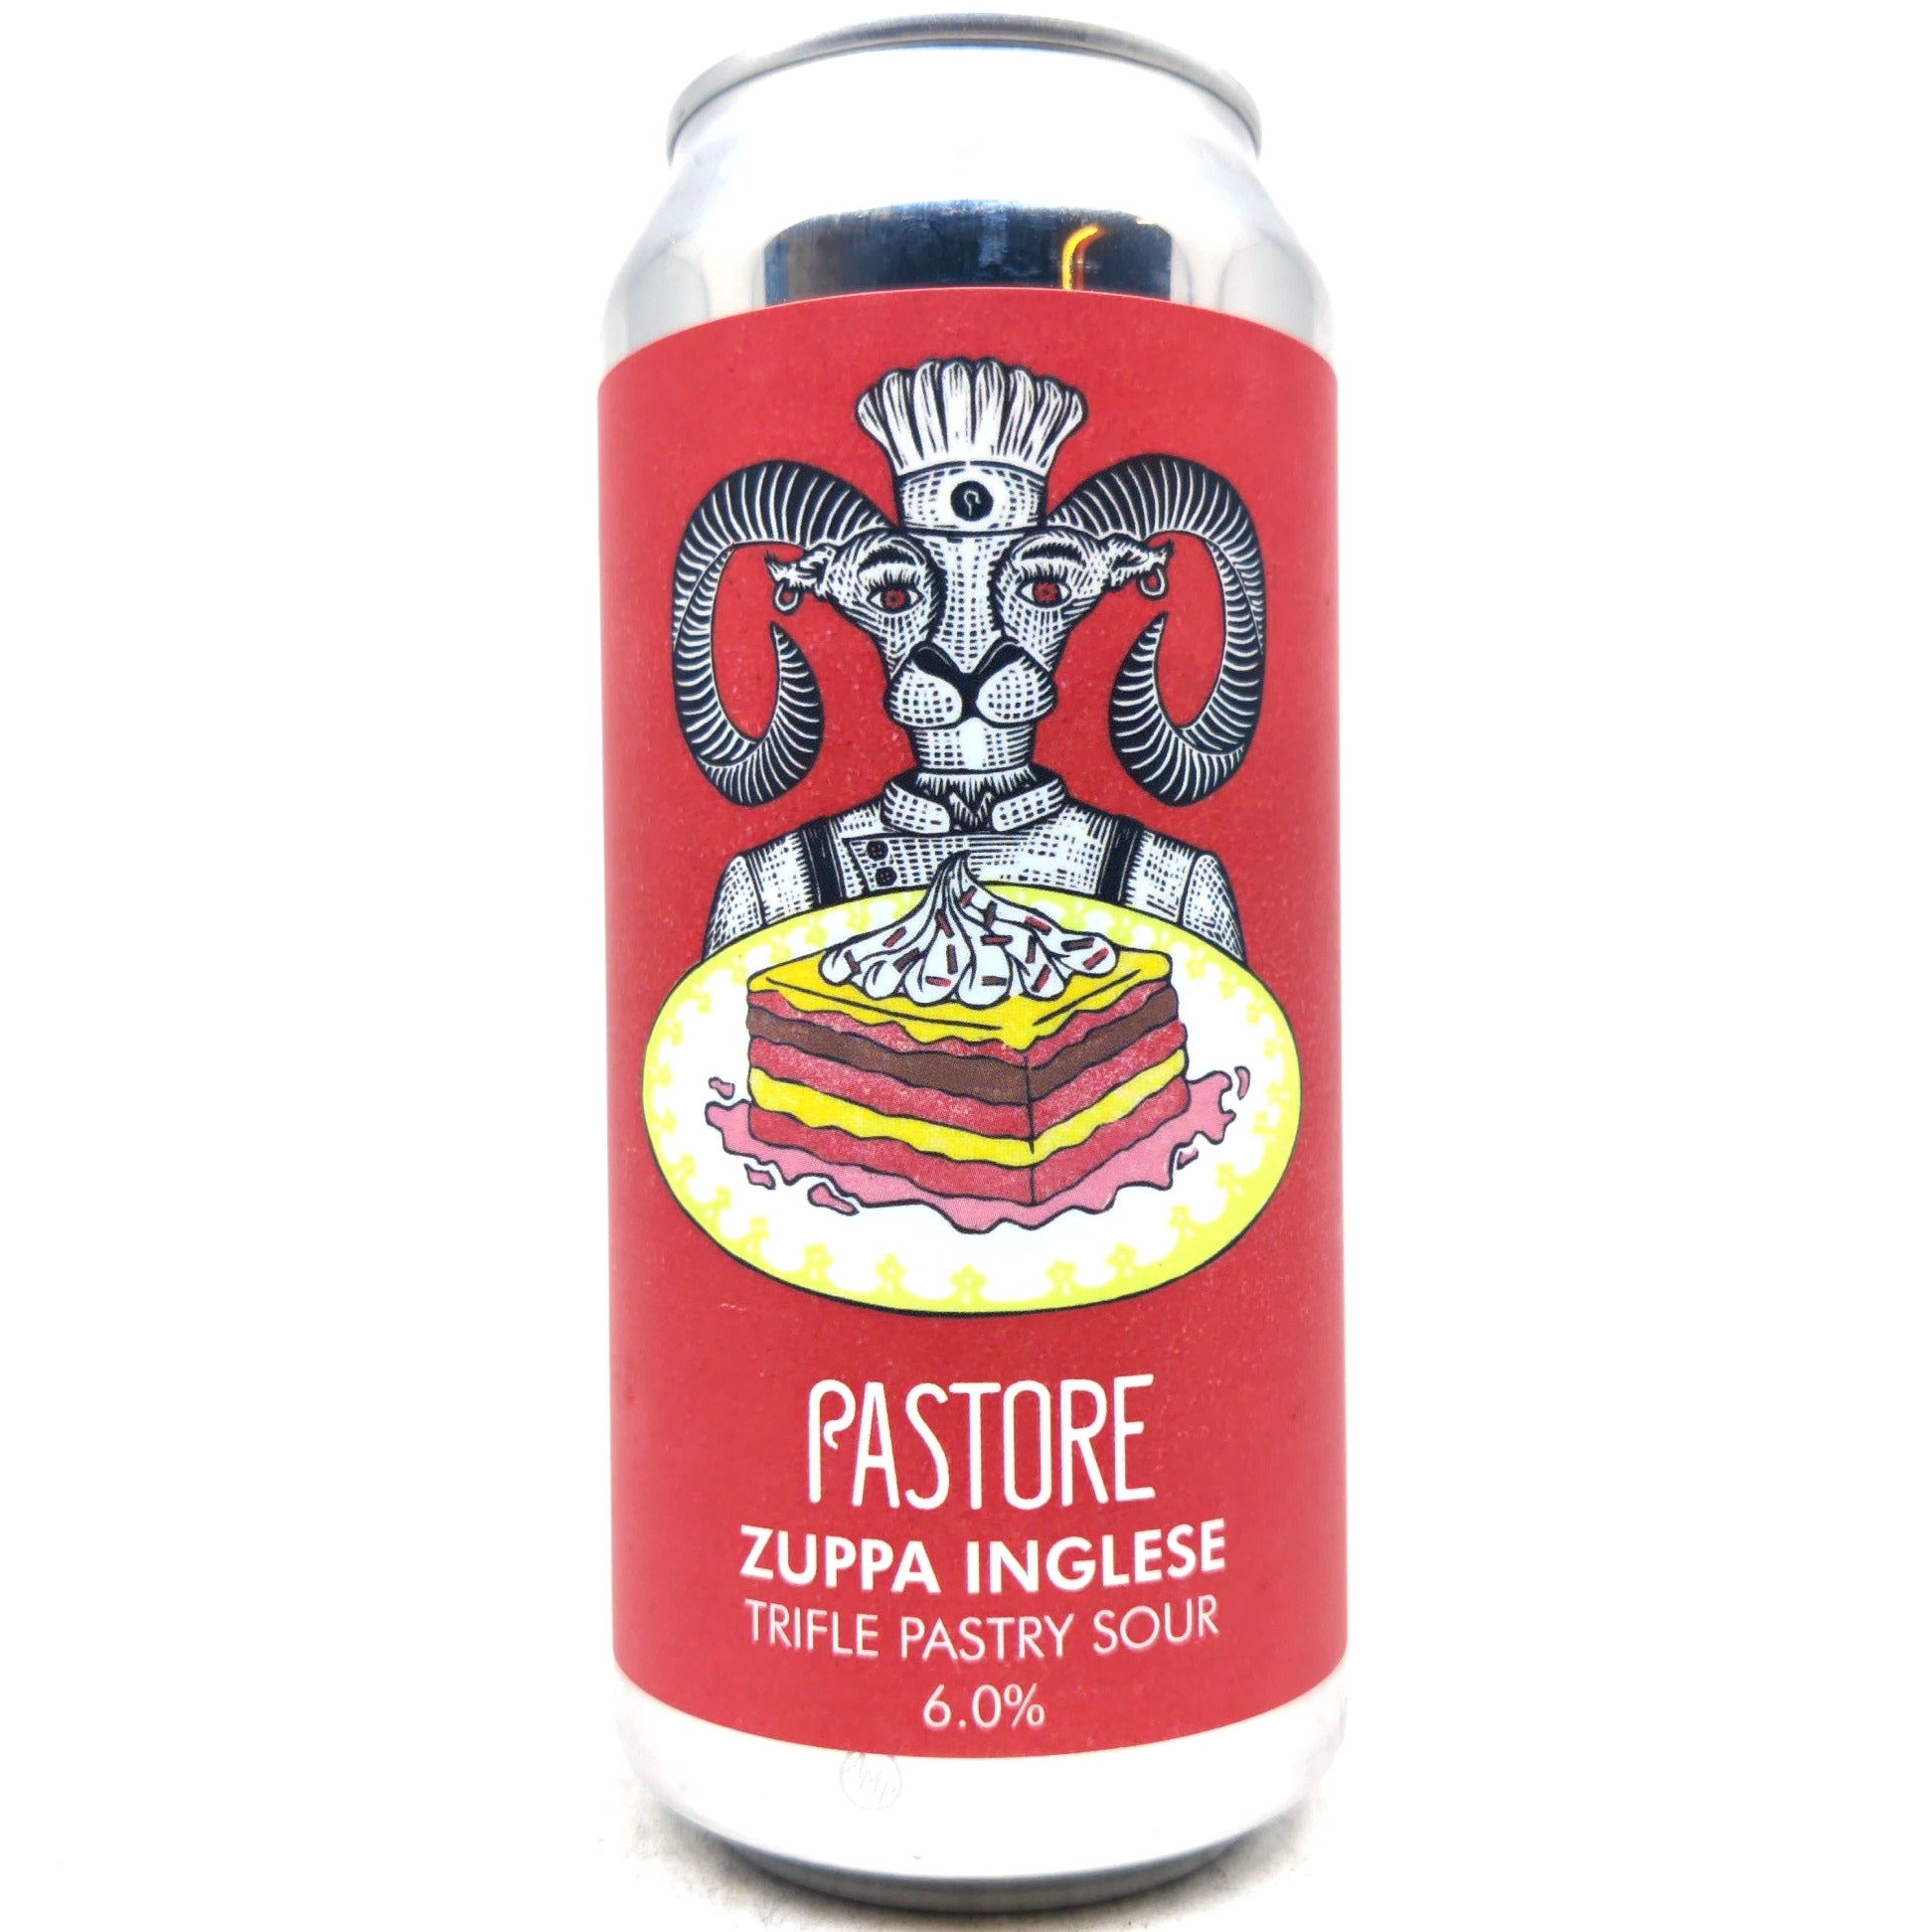 Pastore Zuppa Inglese Pastry Sour 6% (440ml can)-Hop Burns & Black